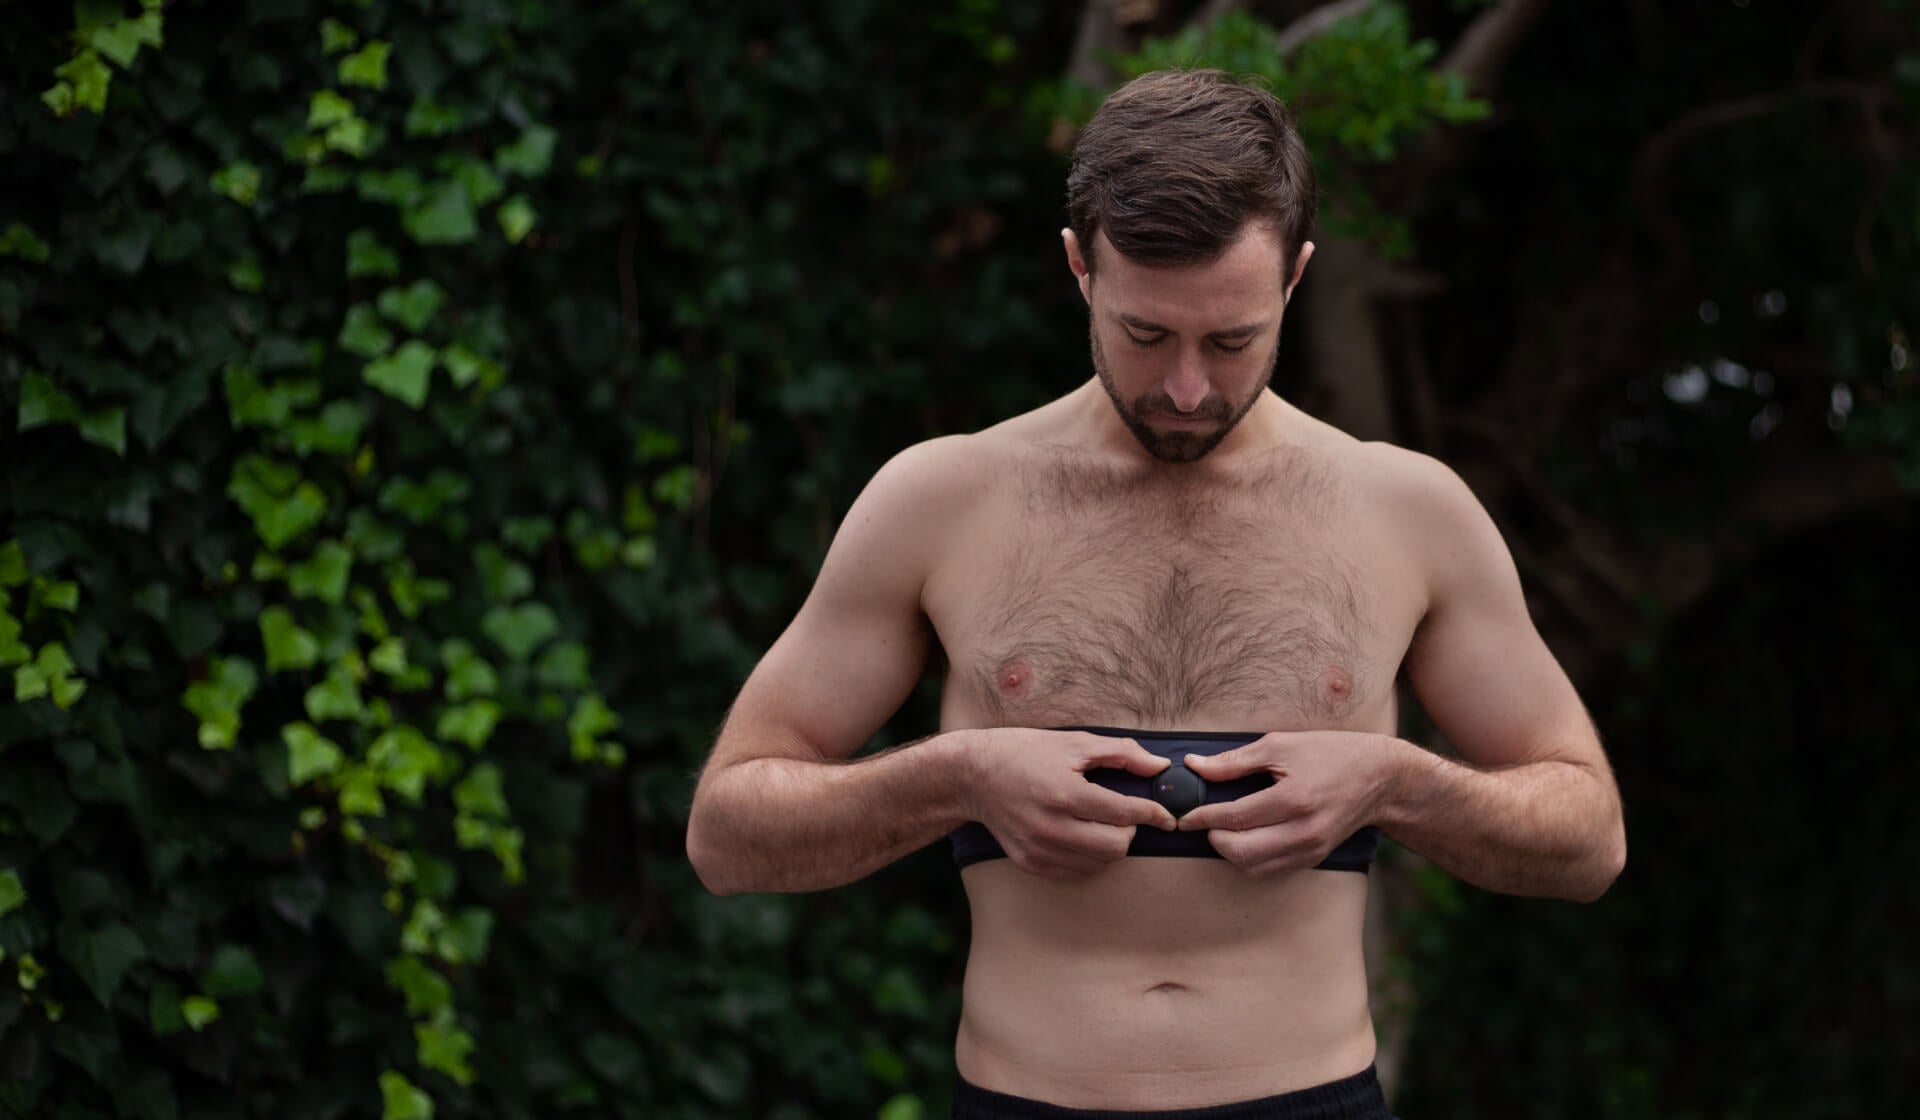 Man outdoors, attaching the Oxa breathing coach device to his waistband preparing for a focused breathing session to enhance his wellbeing and resilience.